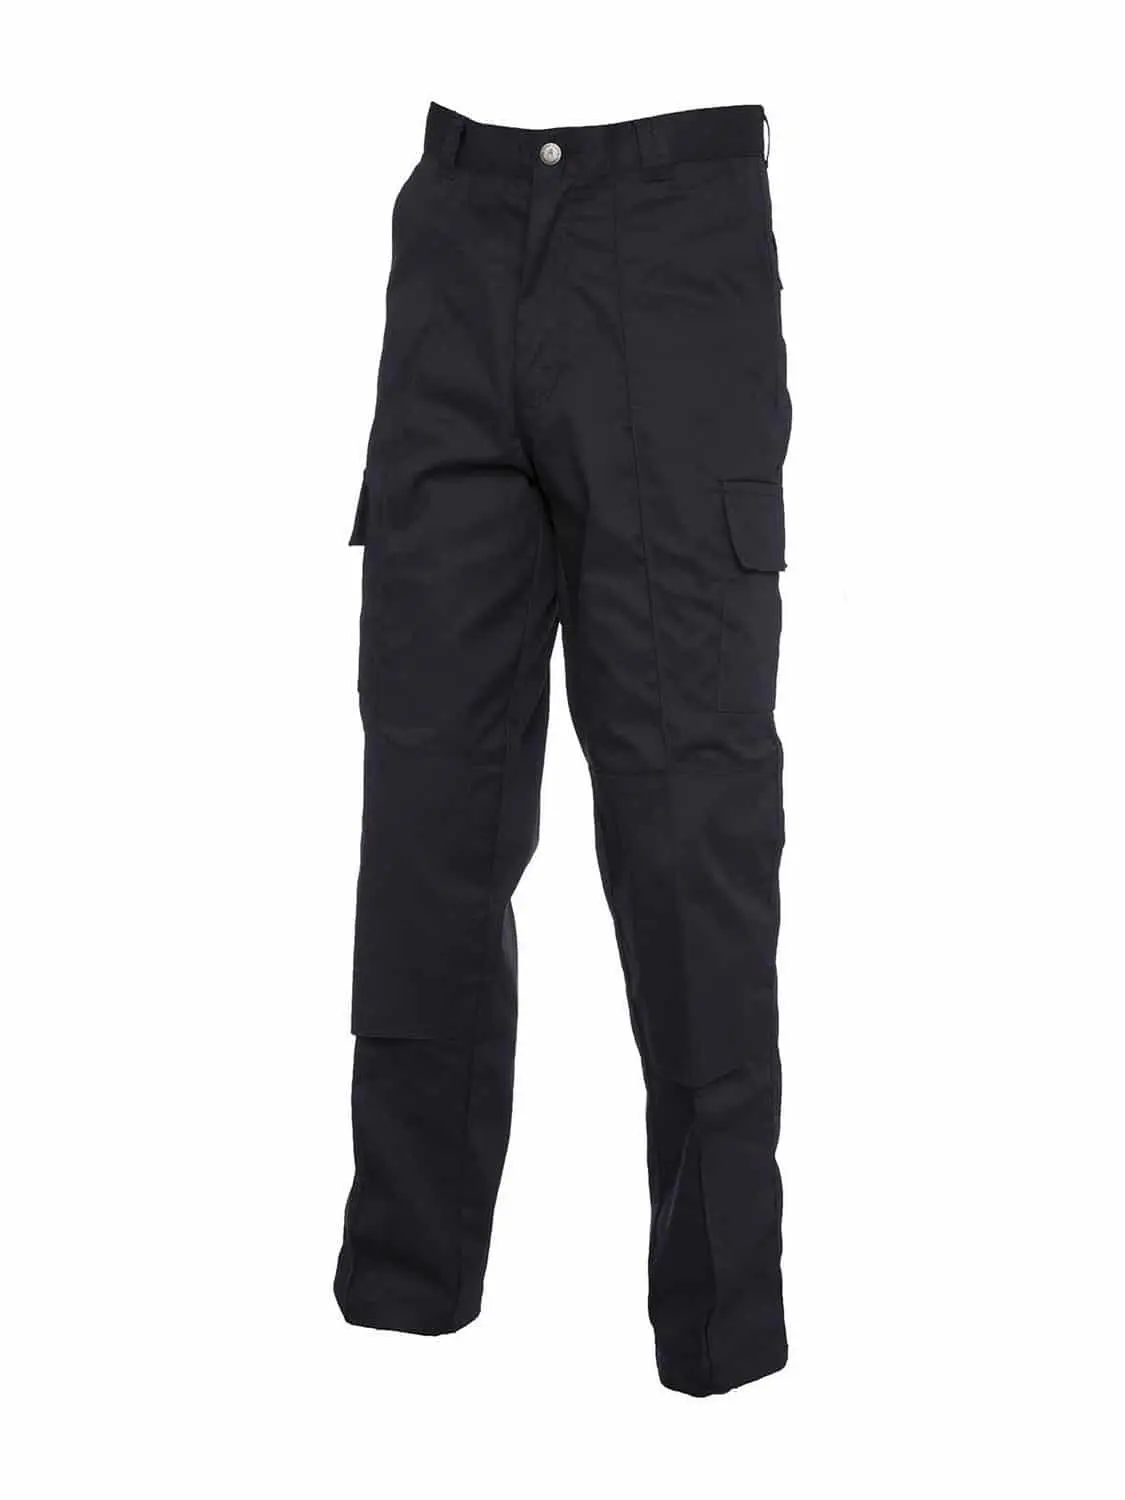 Uneek Cargo Trouser with Knee Pad Pockets - Black, Front